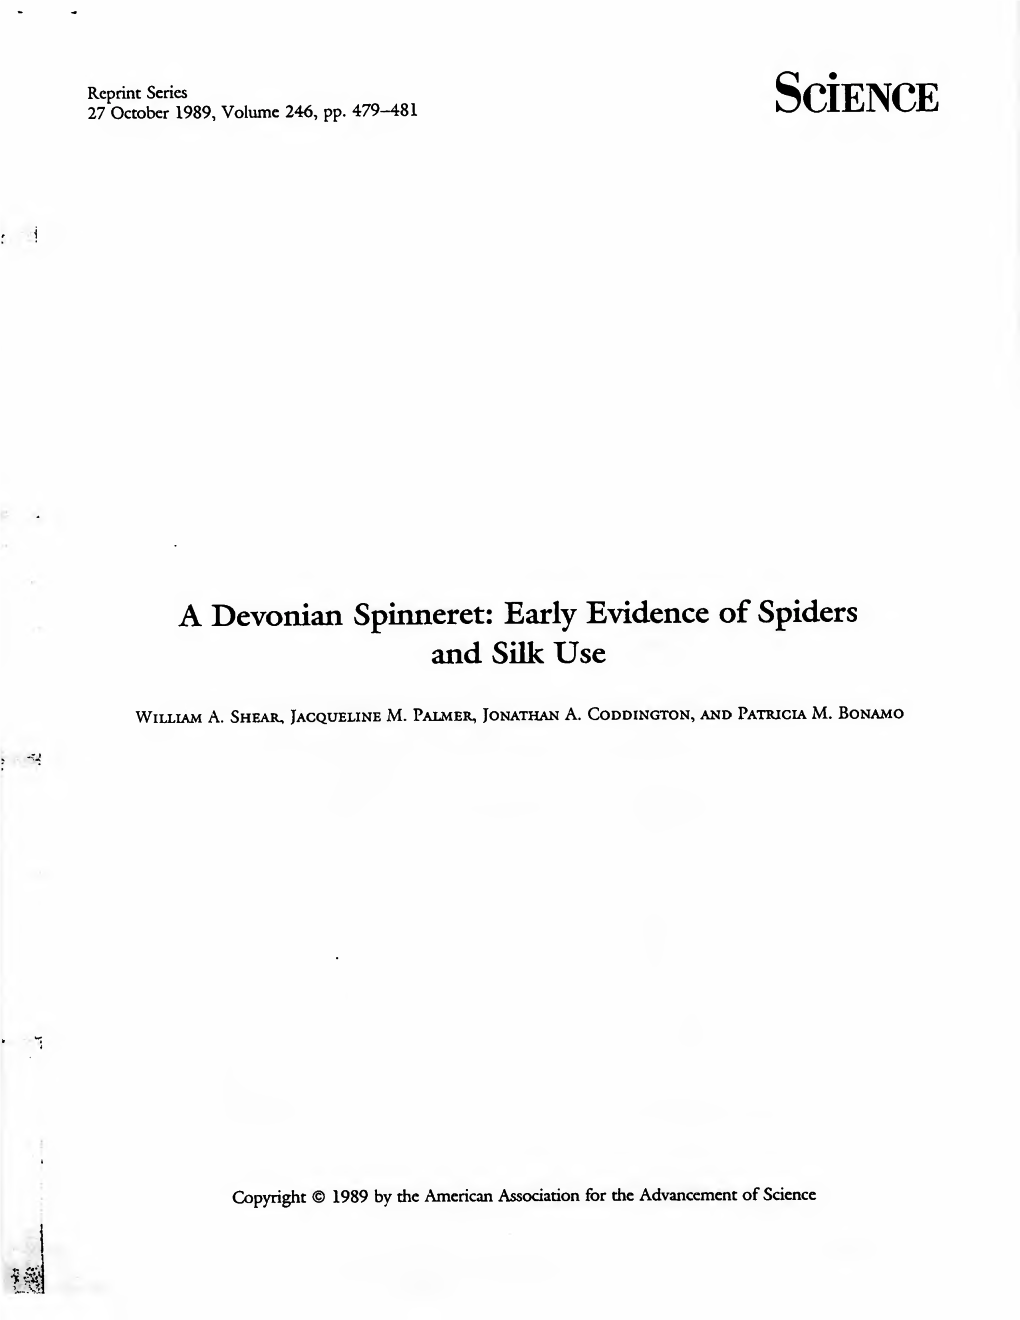 A Devonian Spinneret: Early Evidence of Spiders and Silk Use